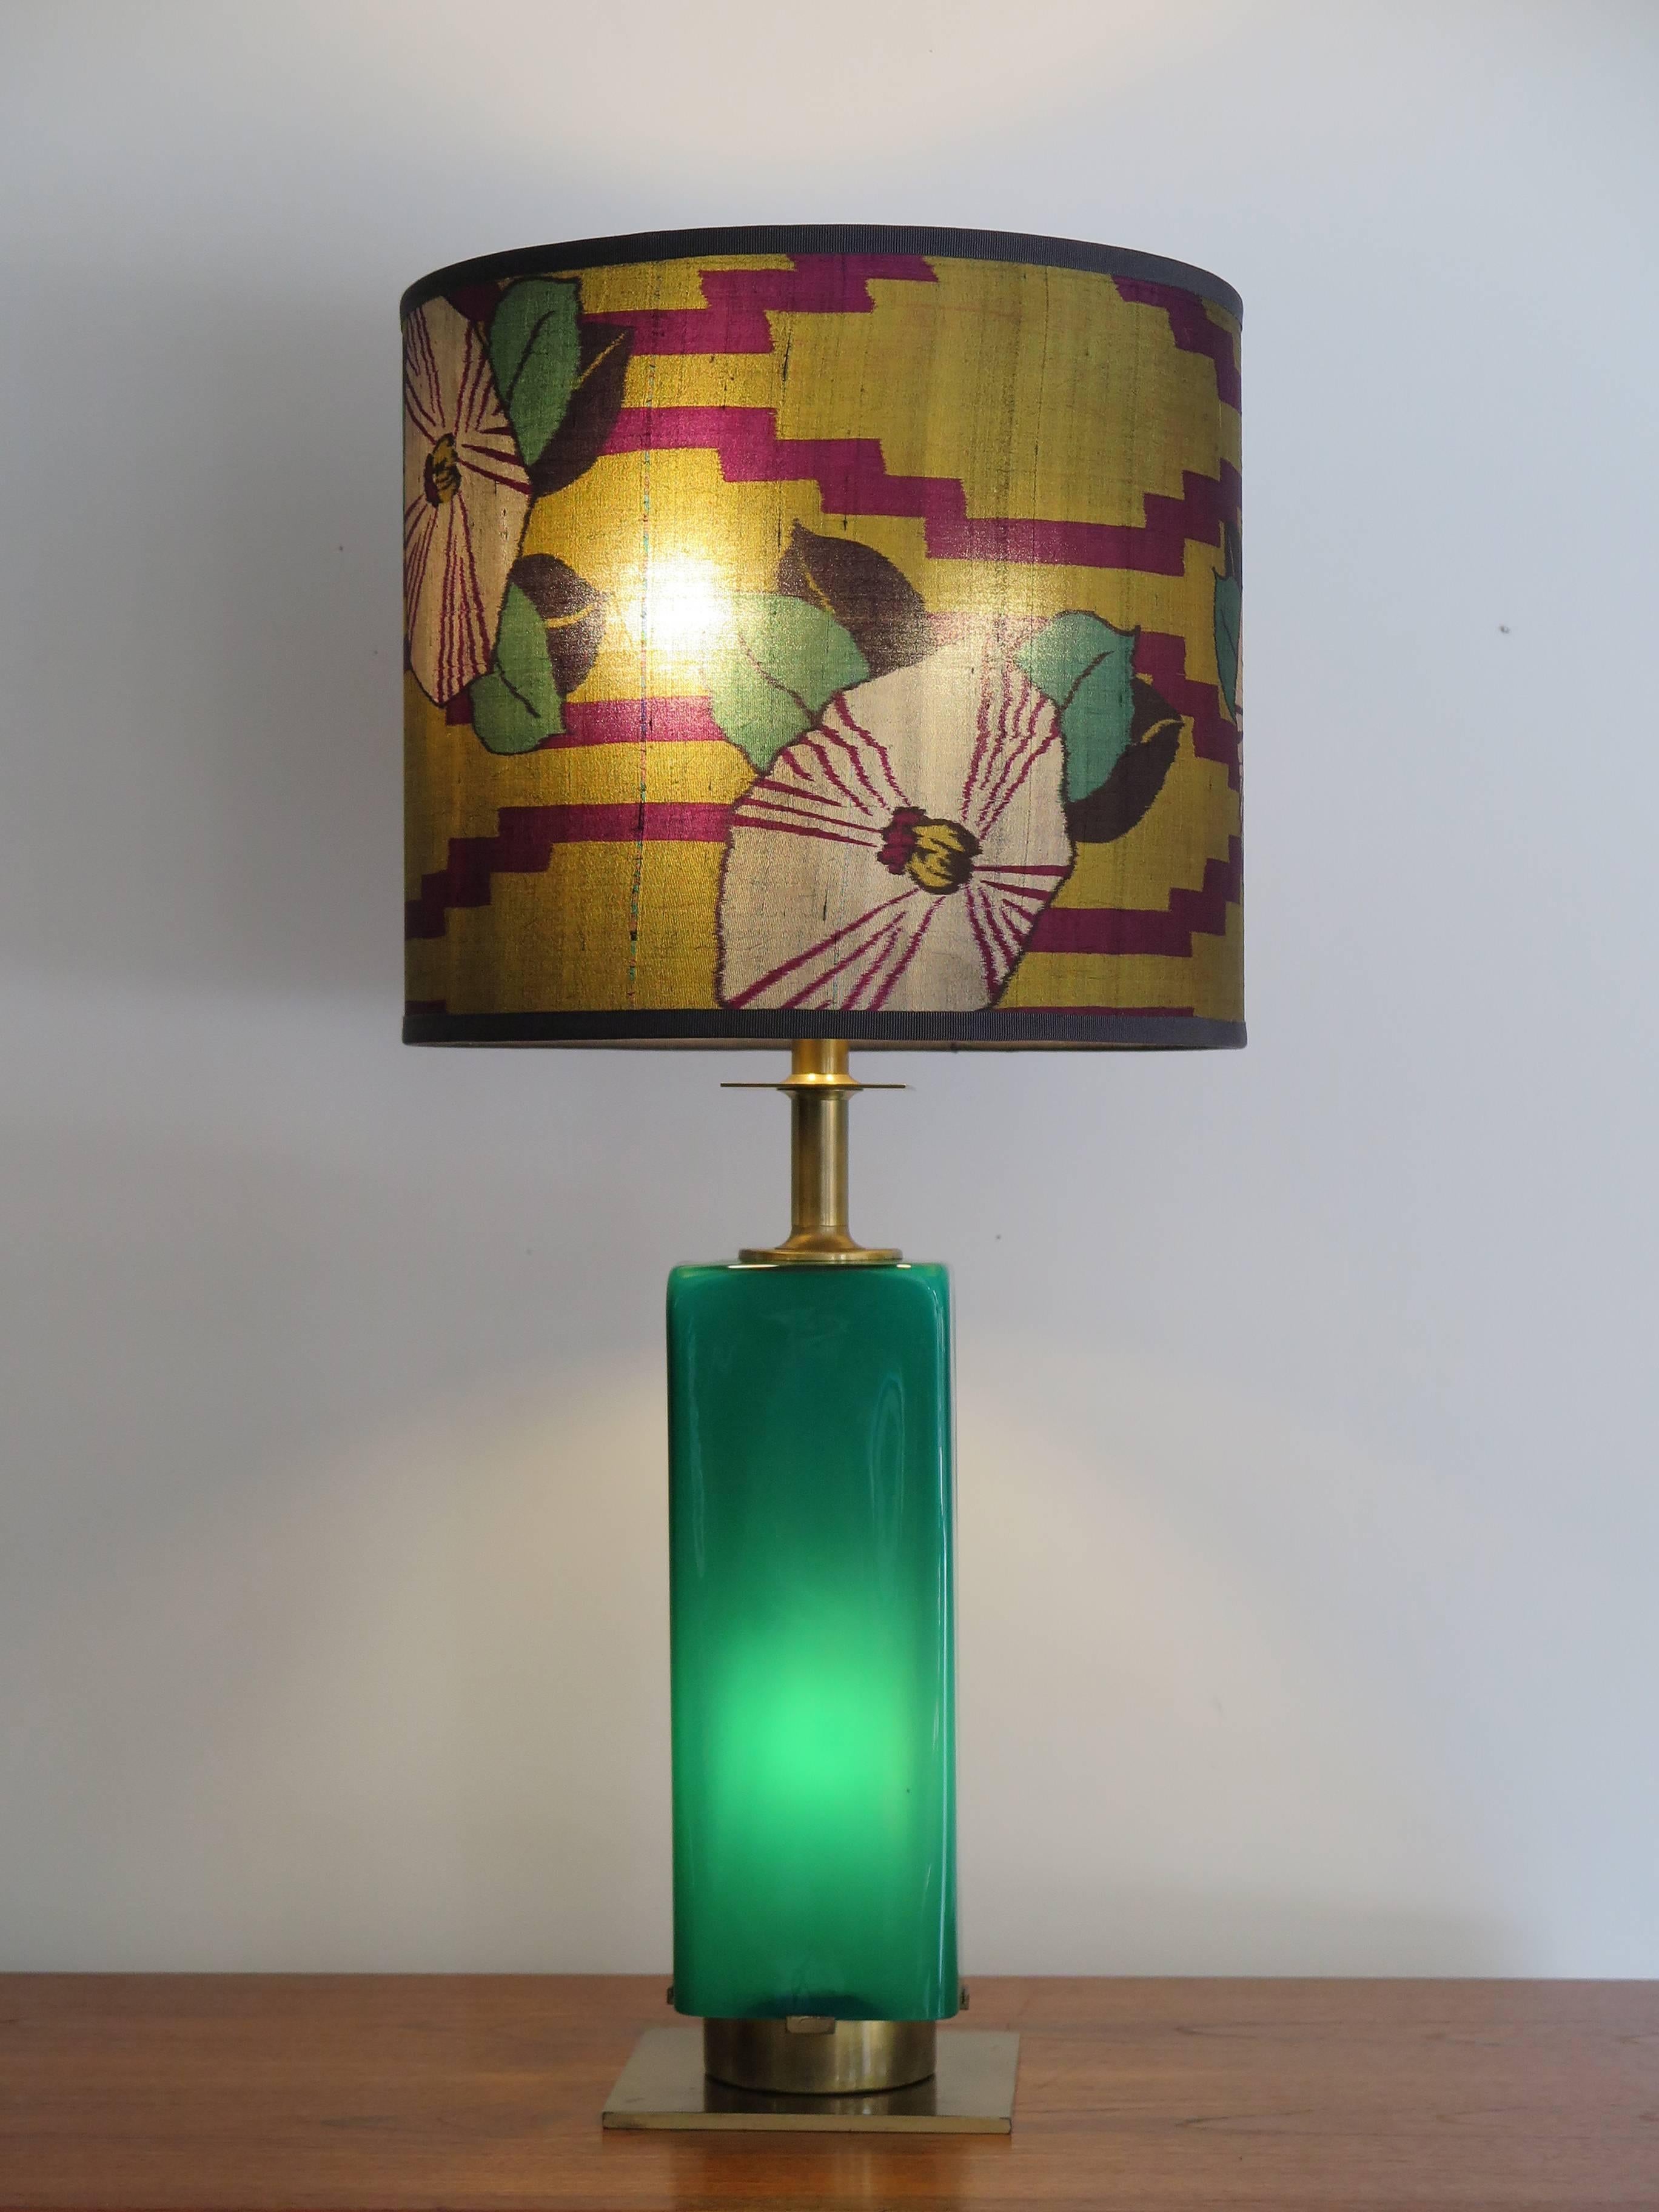 1950s Italian table lamp or lampshade produced by Stilnovo with triple ignition and base in green glass, brass structure and manufacture label. Lampshade made new with antique Japanese kimono fabric.